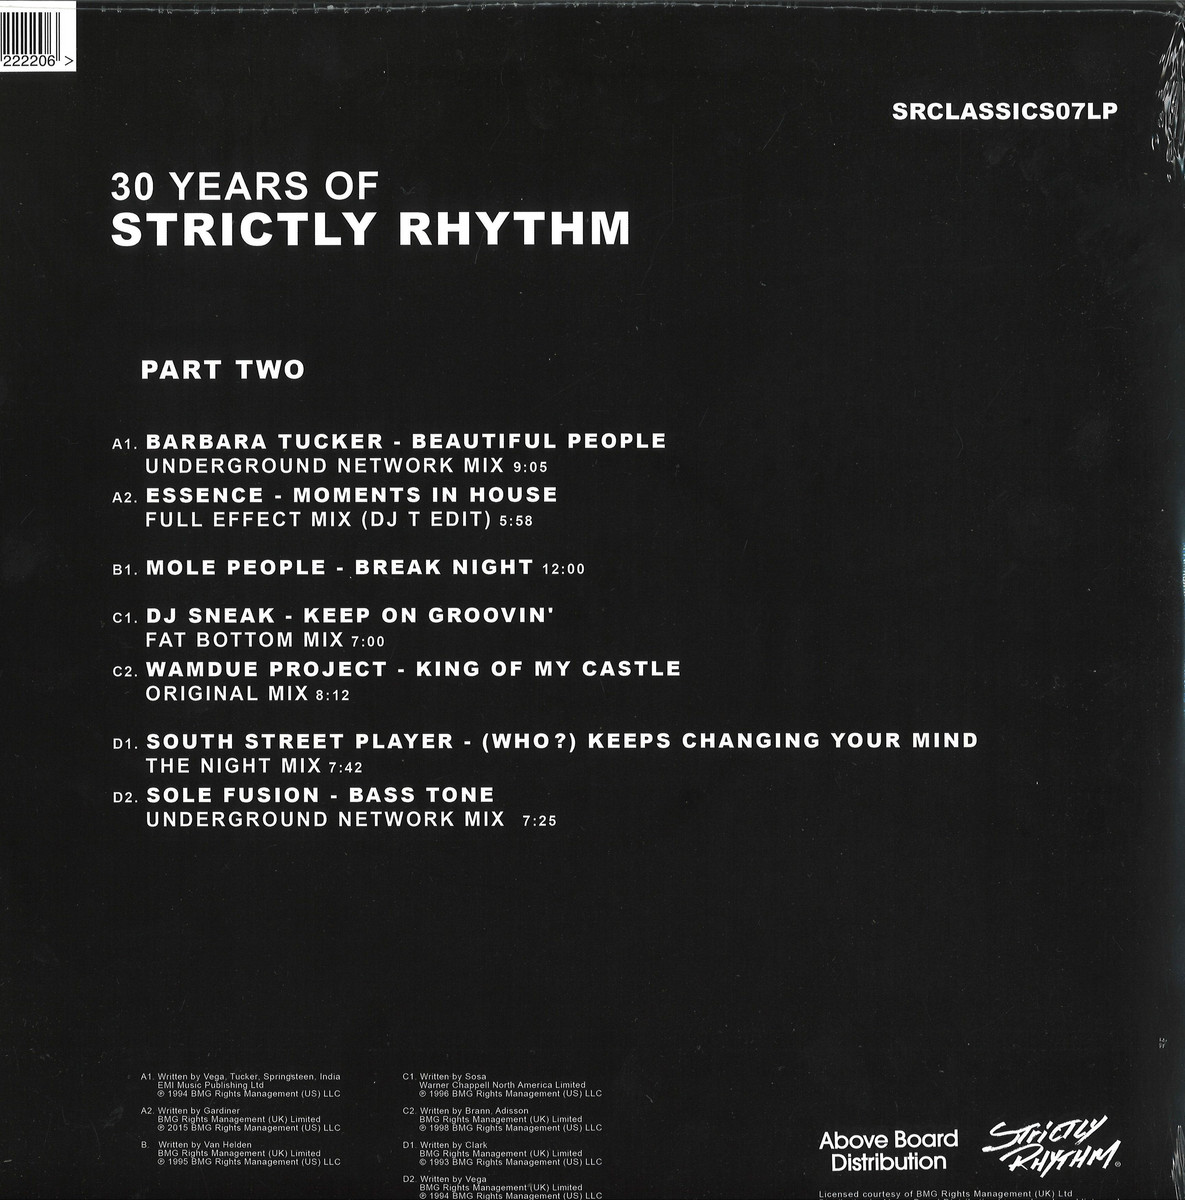 Mole People / DJ Sneak / Wamdue Project / Sole Fusion / Various Artists -  30 Years Of Strictly Rhythm - Part Two / Strictly Rhythm SRCLASSICS07LP -  Vinyl